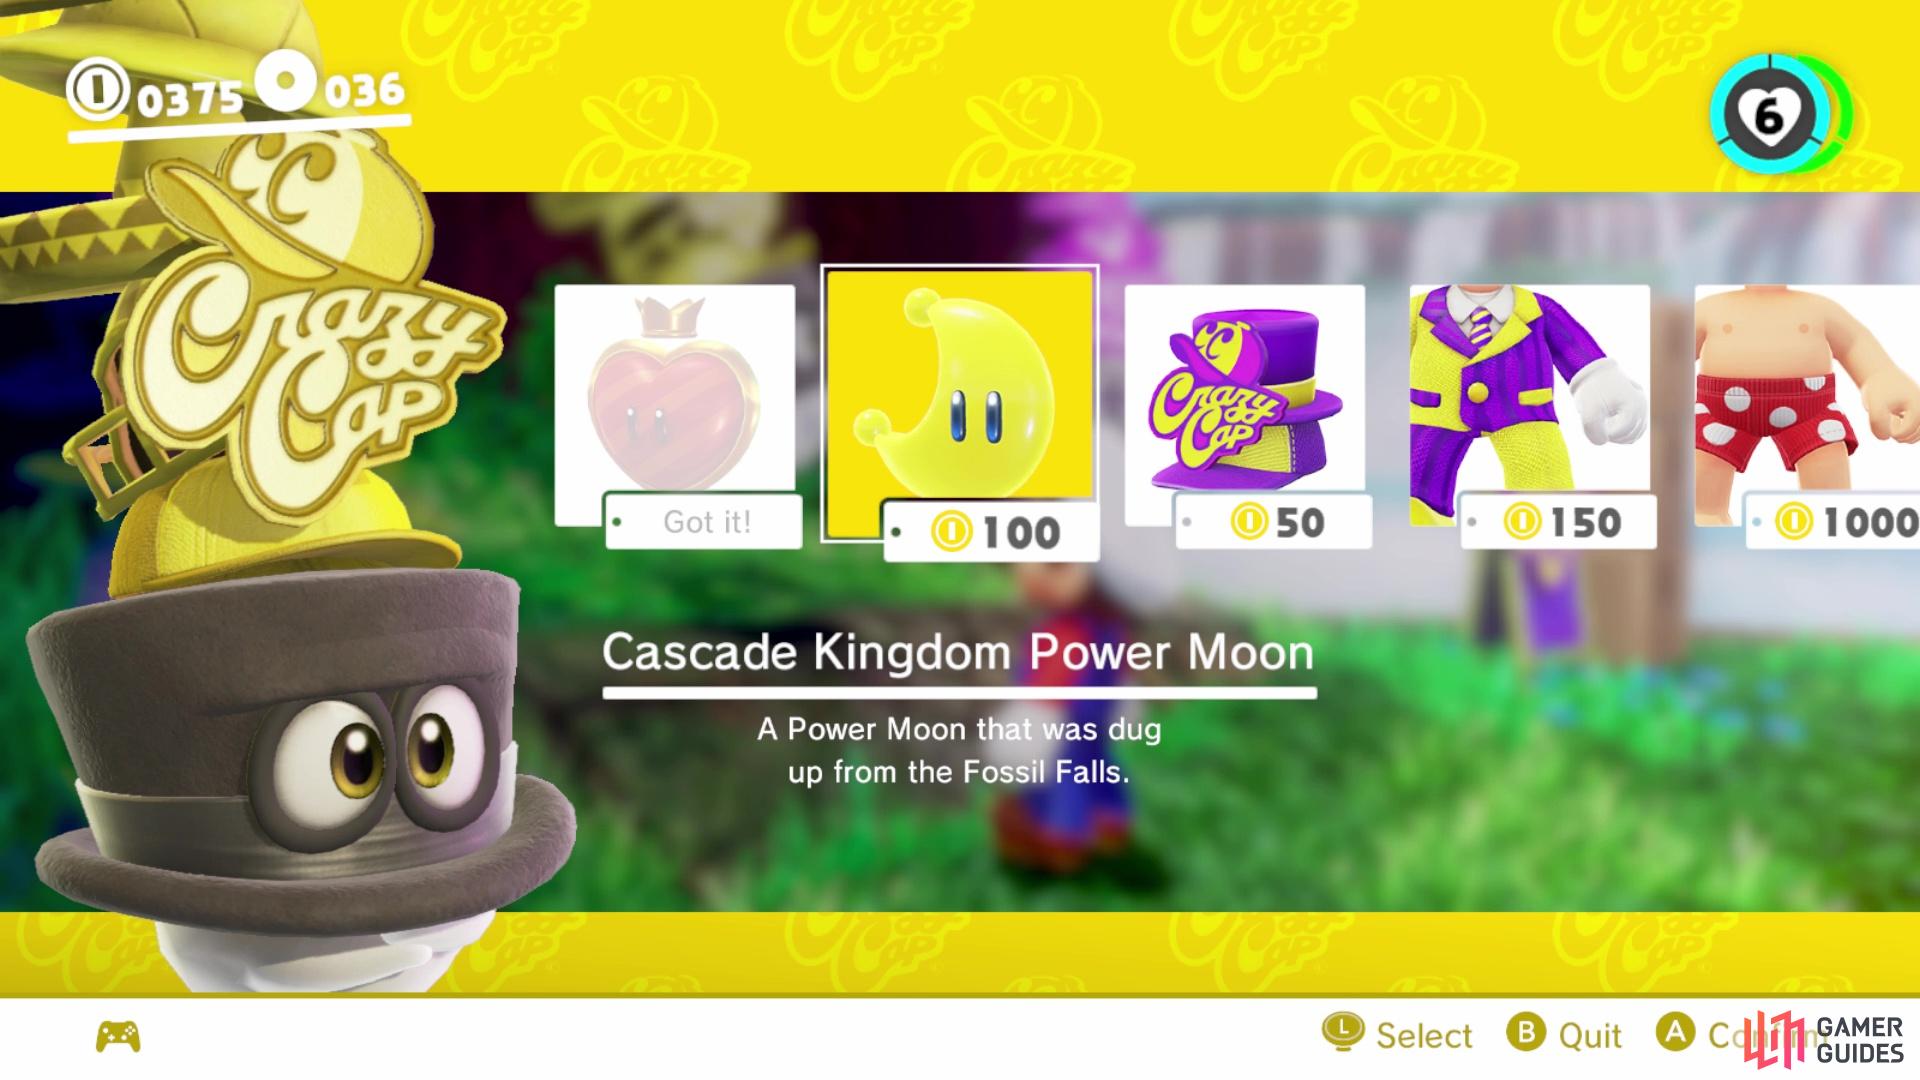 Power Moons from Super Mario Odyssey!